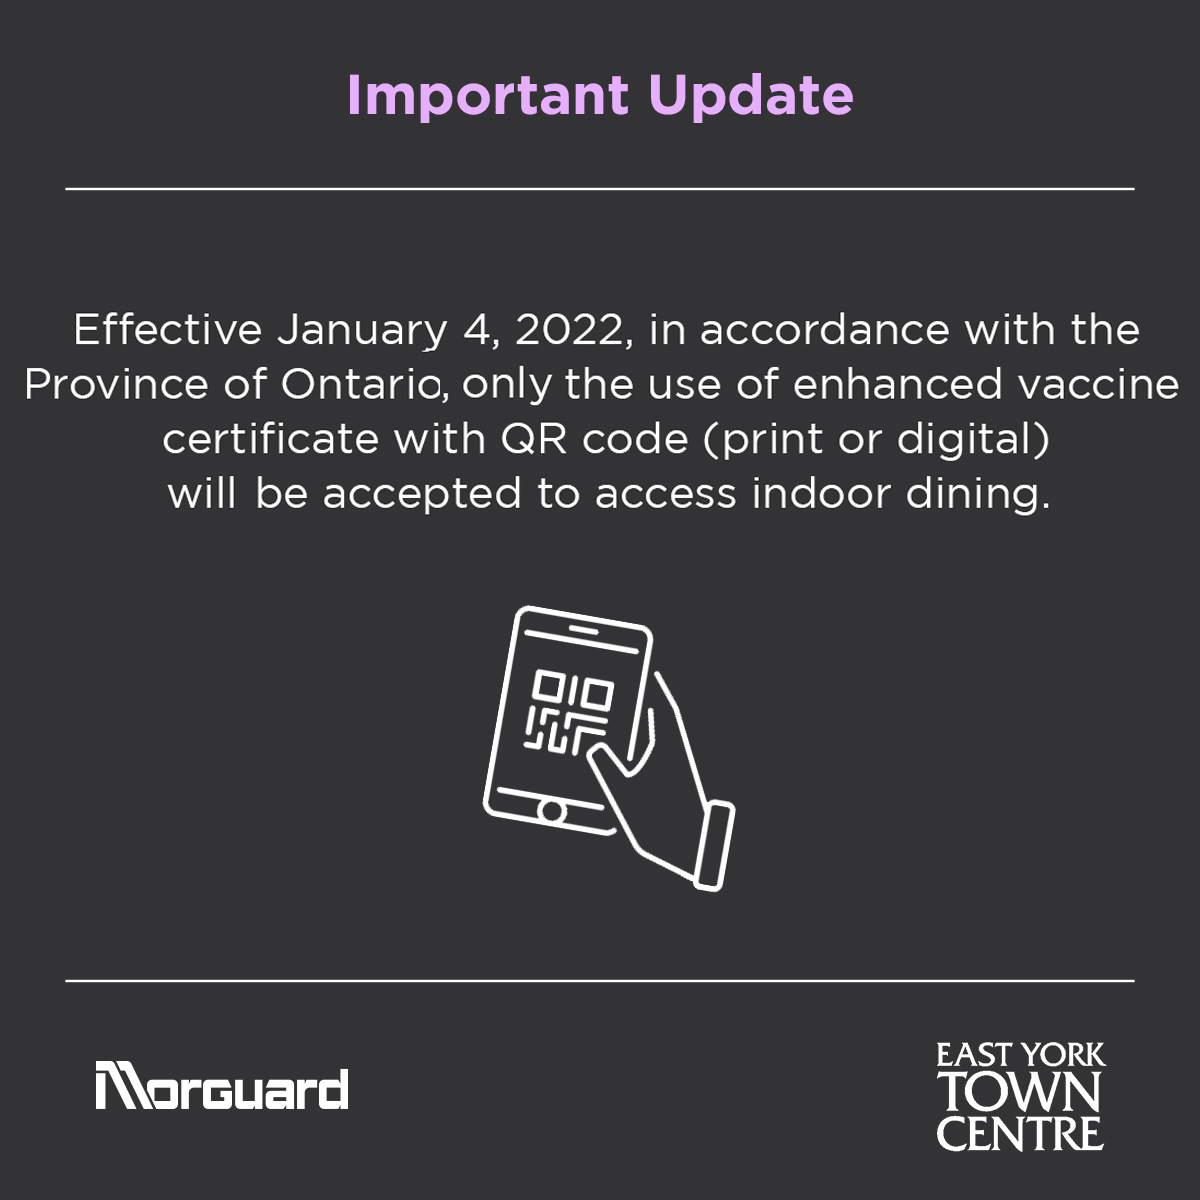 Please note that effective today (January 4, 2022), in accordance with the Province of Ontario, only the use of enhanced vaccine certificates with QR code (print or digital) will be accepted to access indoor dining. This includes dining at our restaurants and food court.